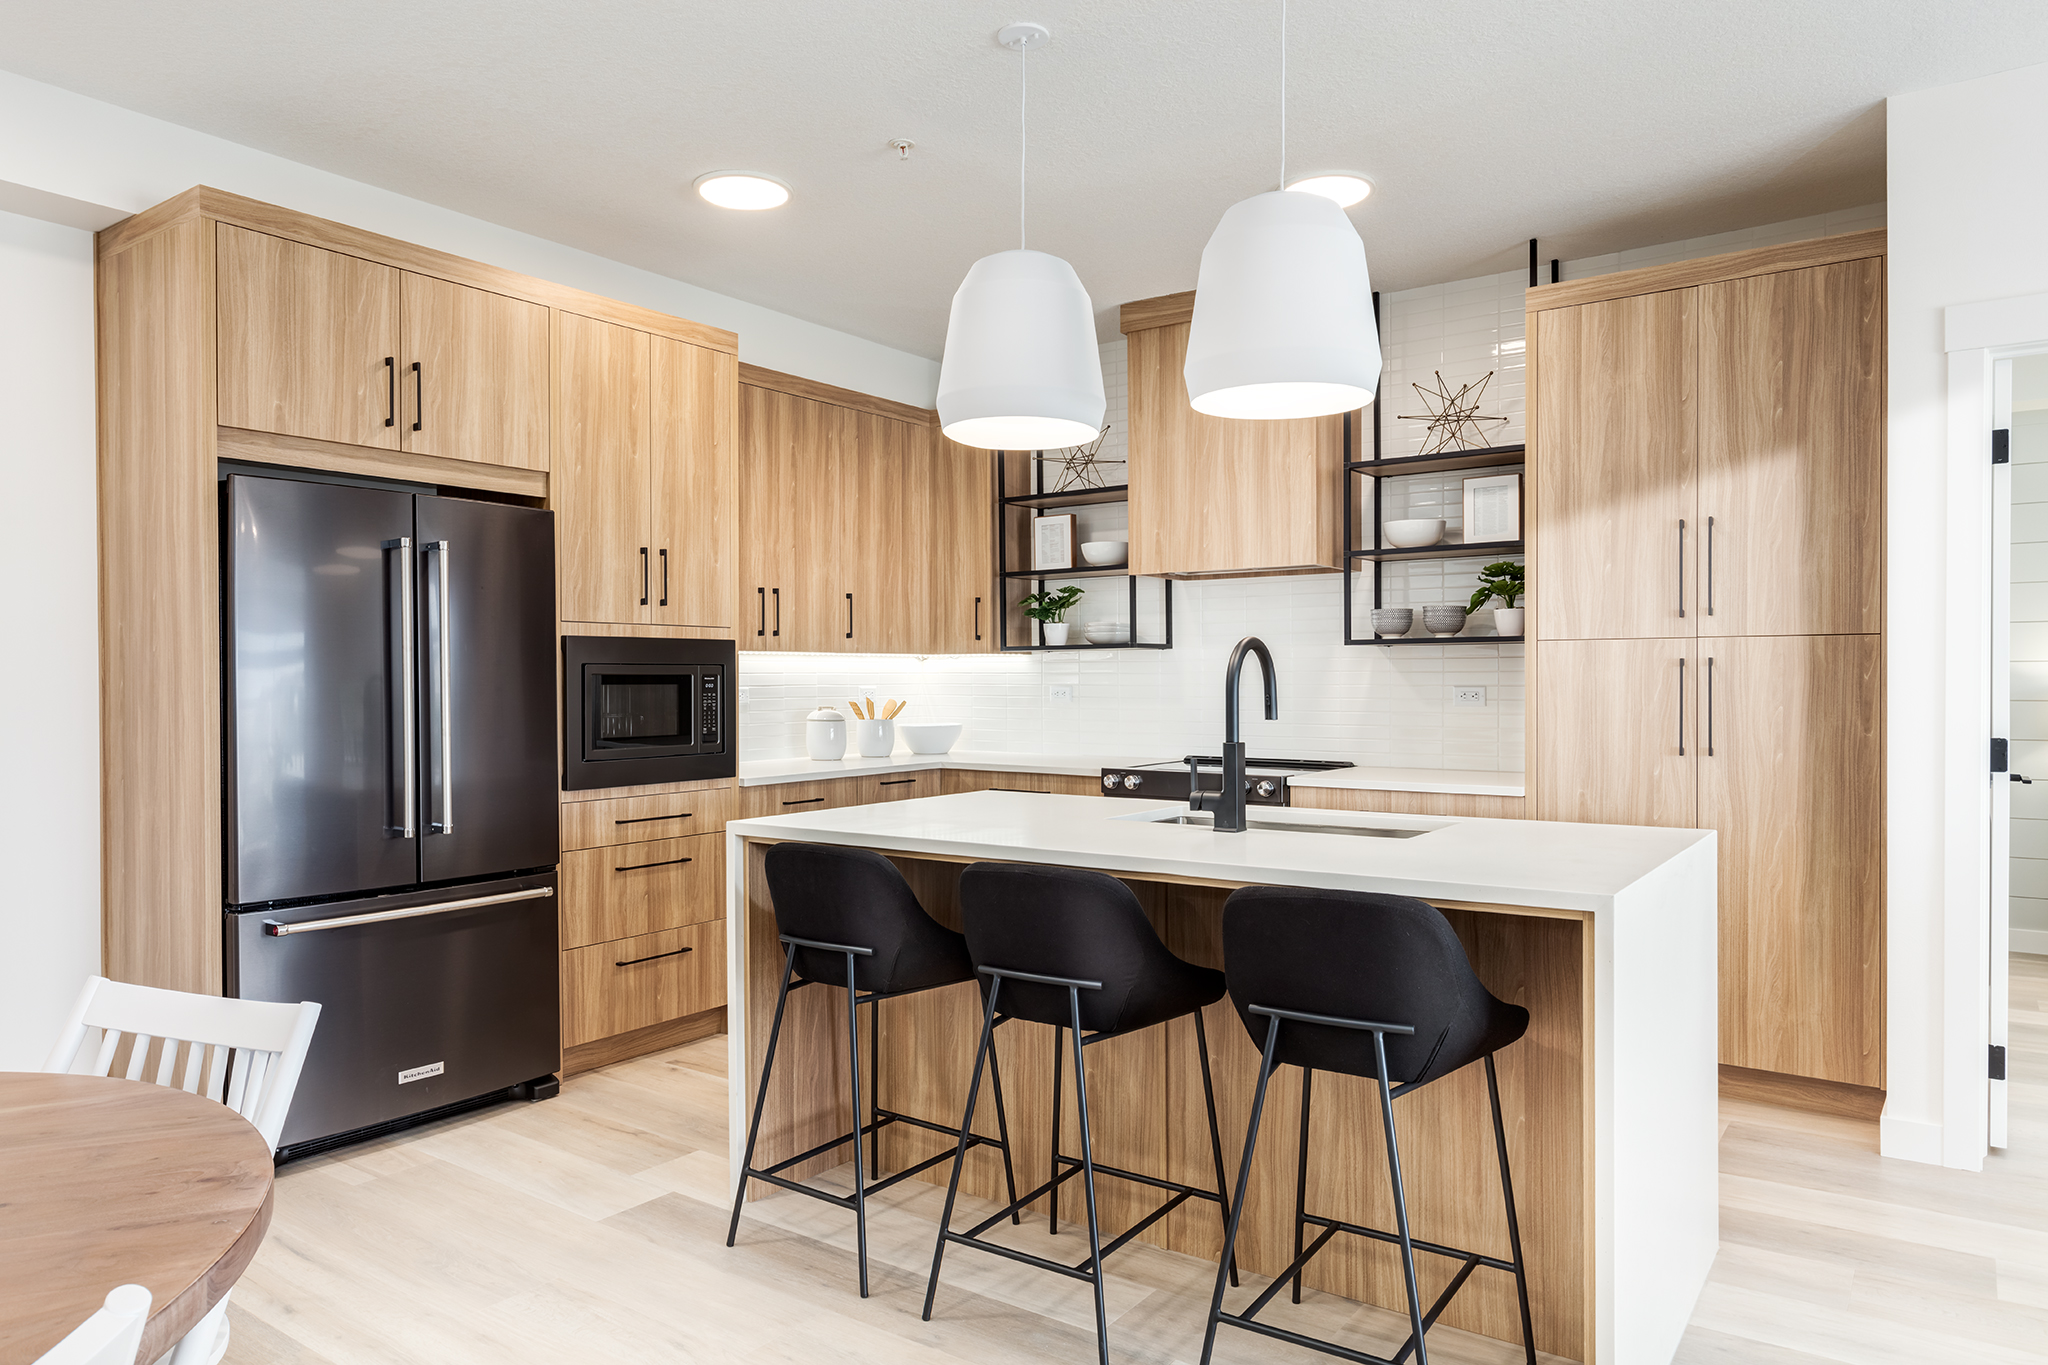 Seton West: Condo convenience with thoughtful design